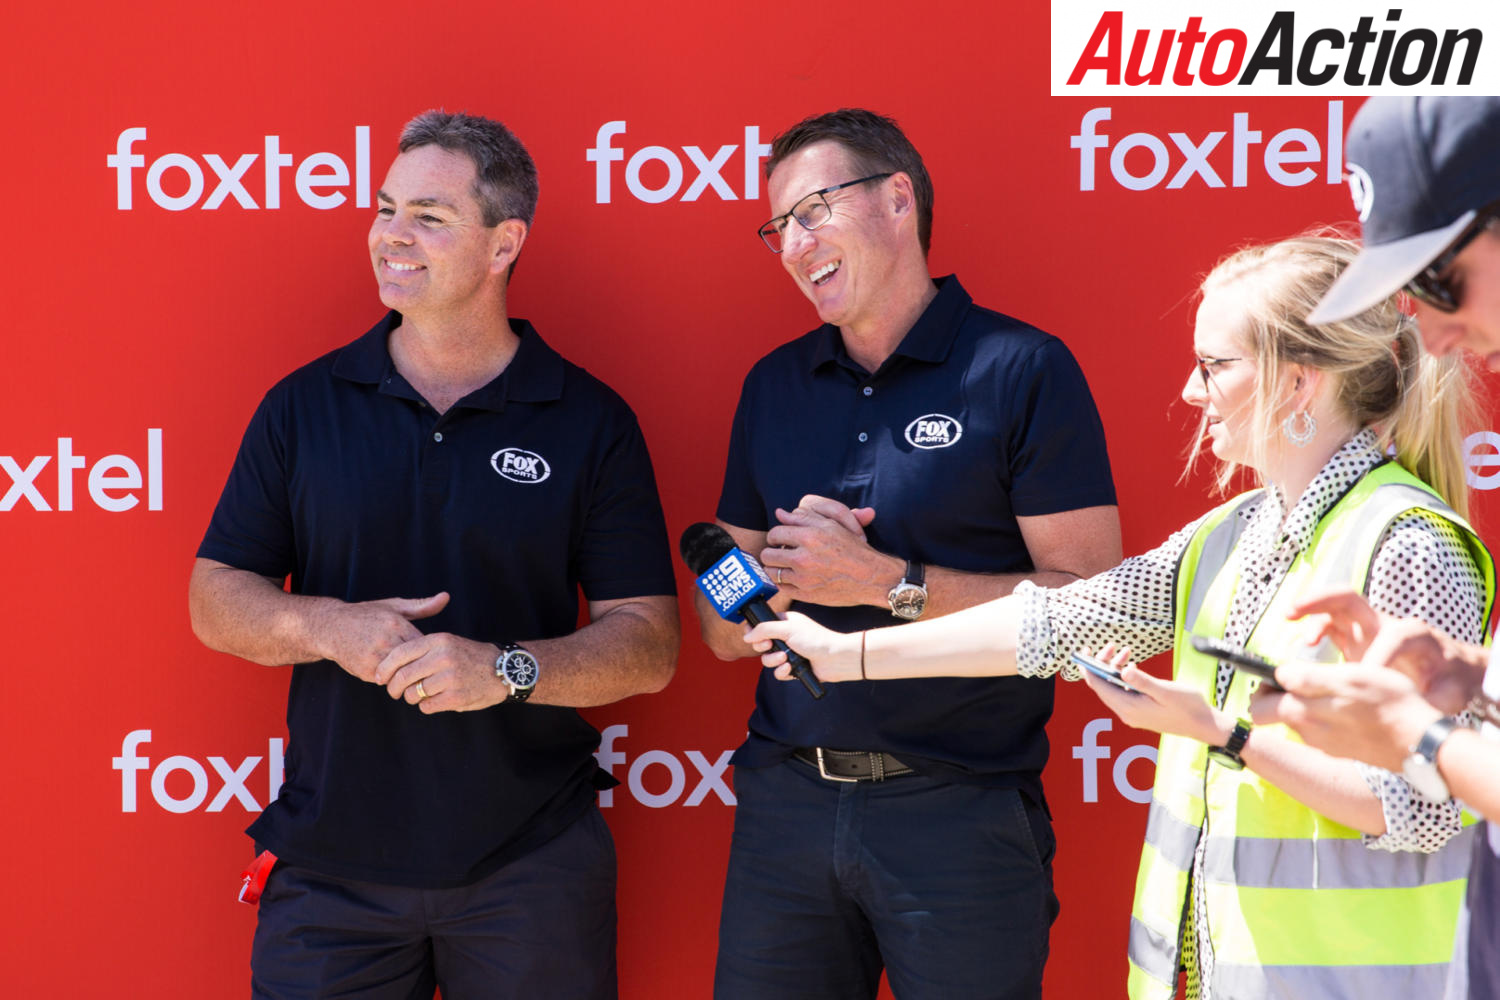 Fresh facts among Supercars broadcast team - Images: InSyde Media